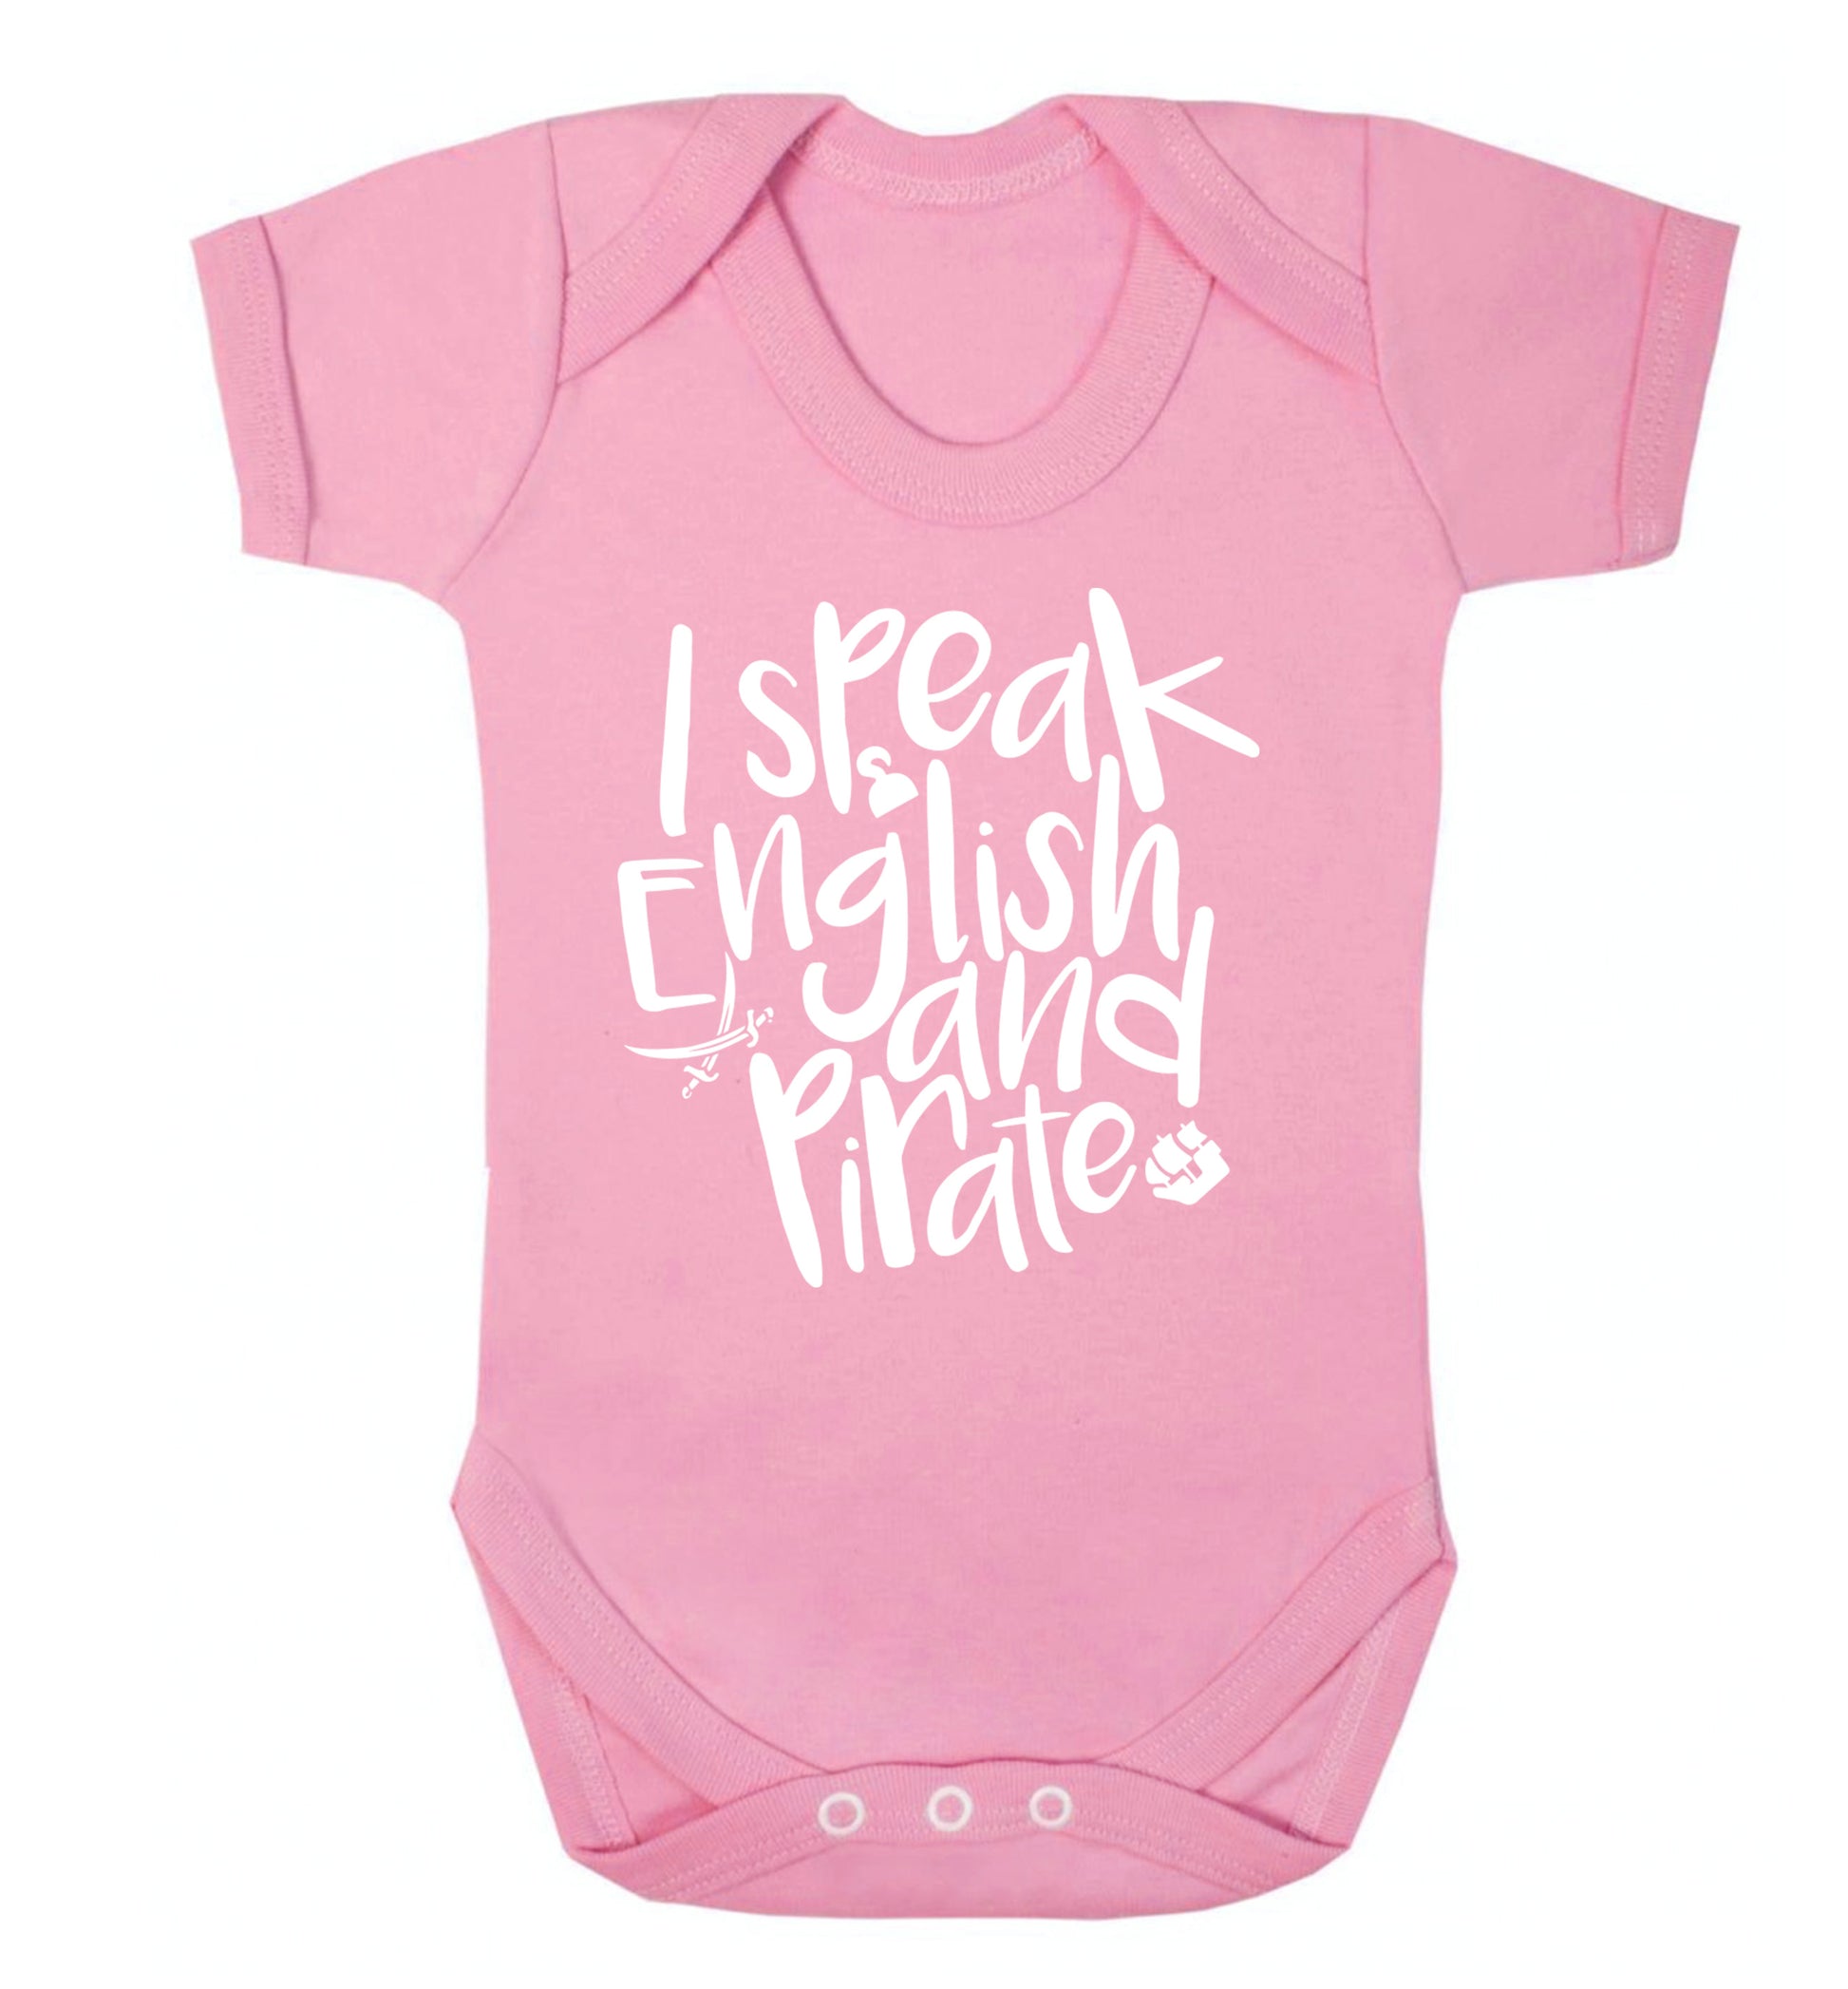 I speak English and pirate Baby Vest pale pink 18-24 months